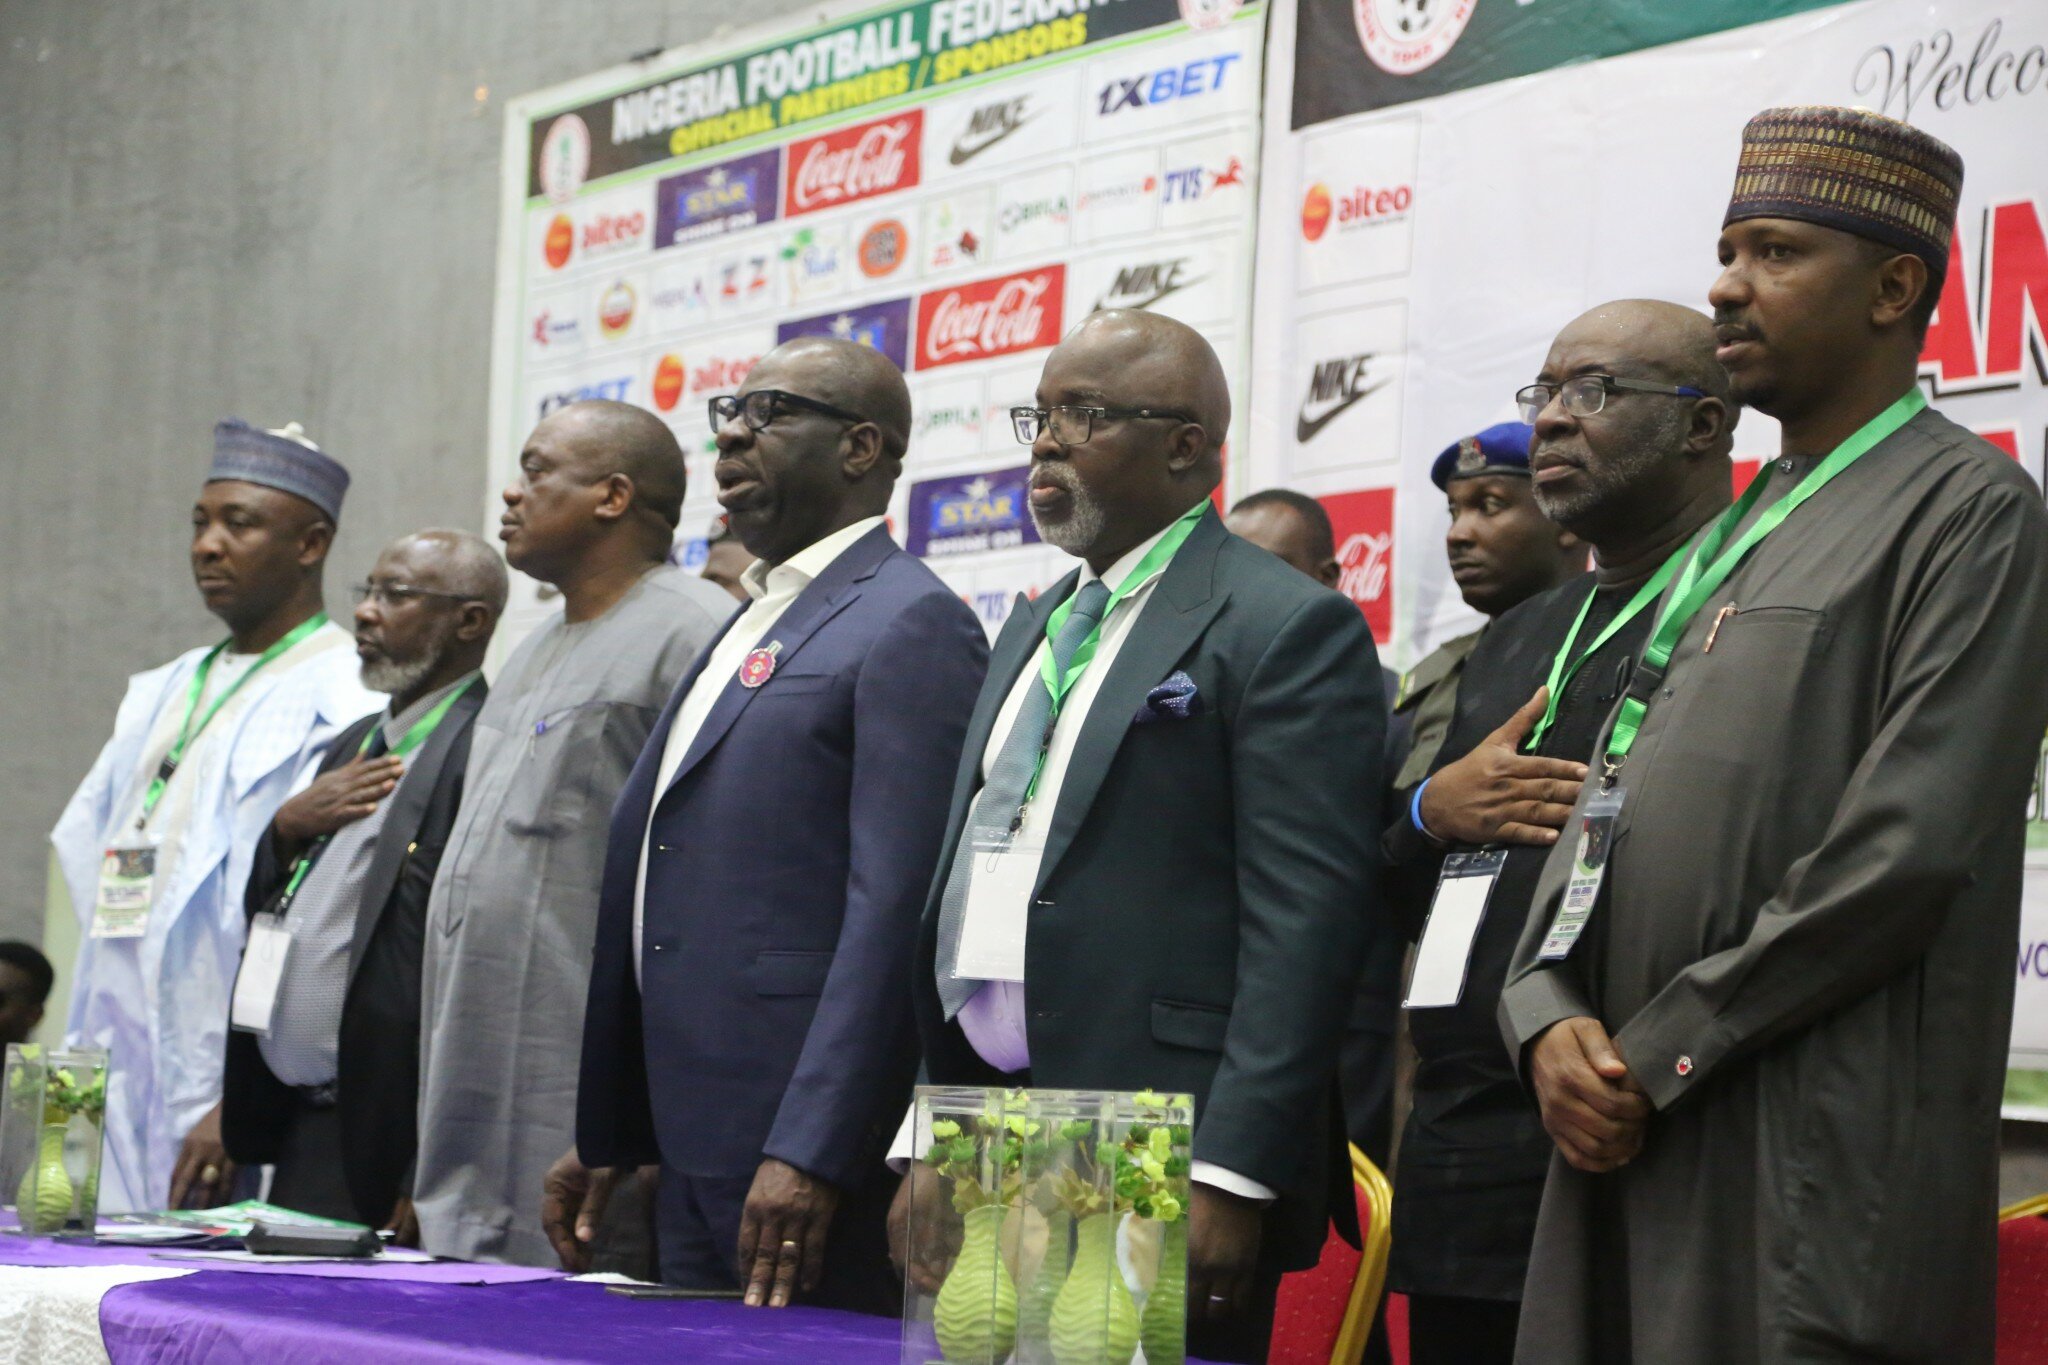 NFF Declare Eagles' 2022 World Cup Qualification Quest ‘High Importance'